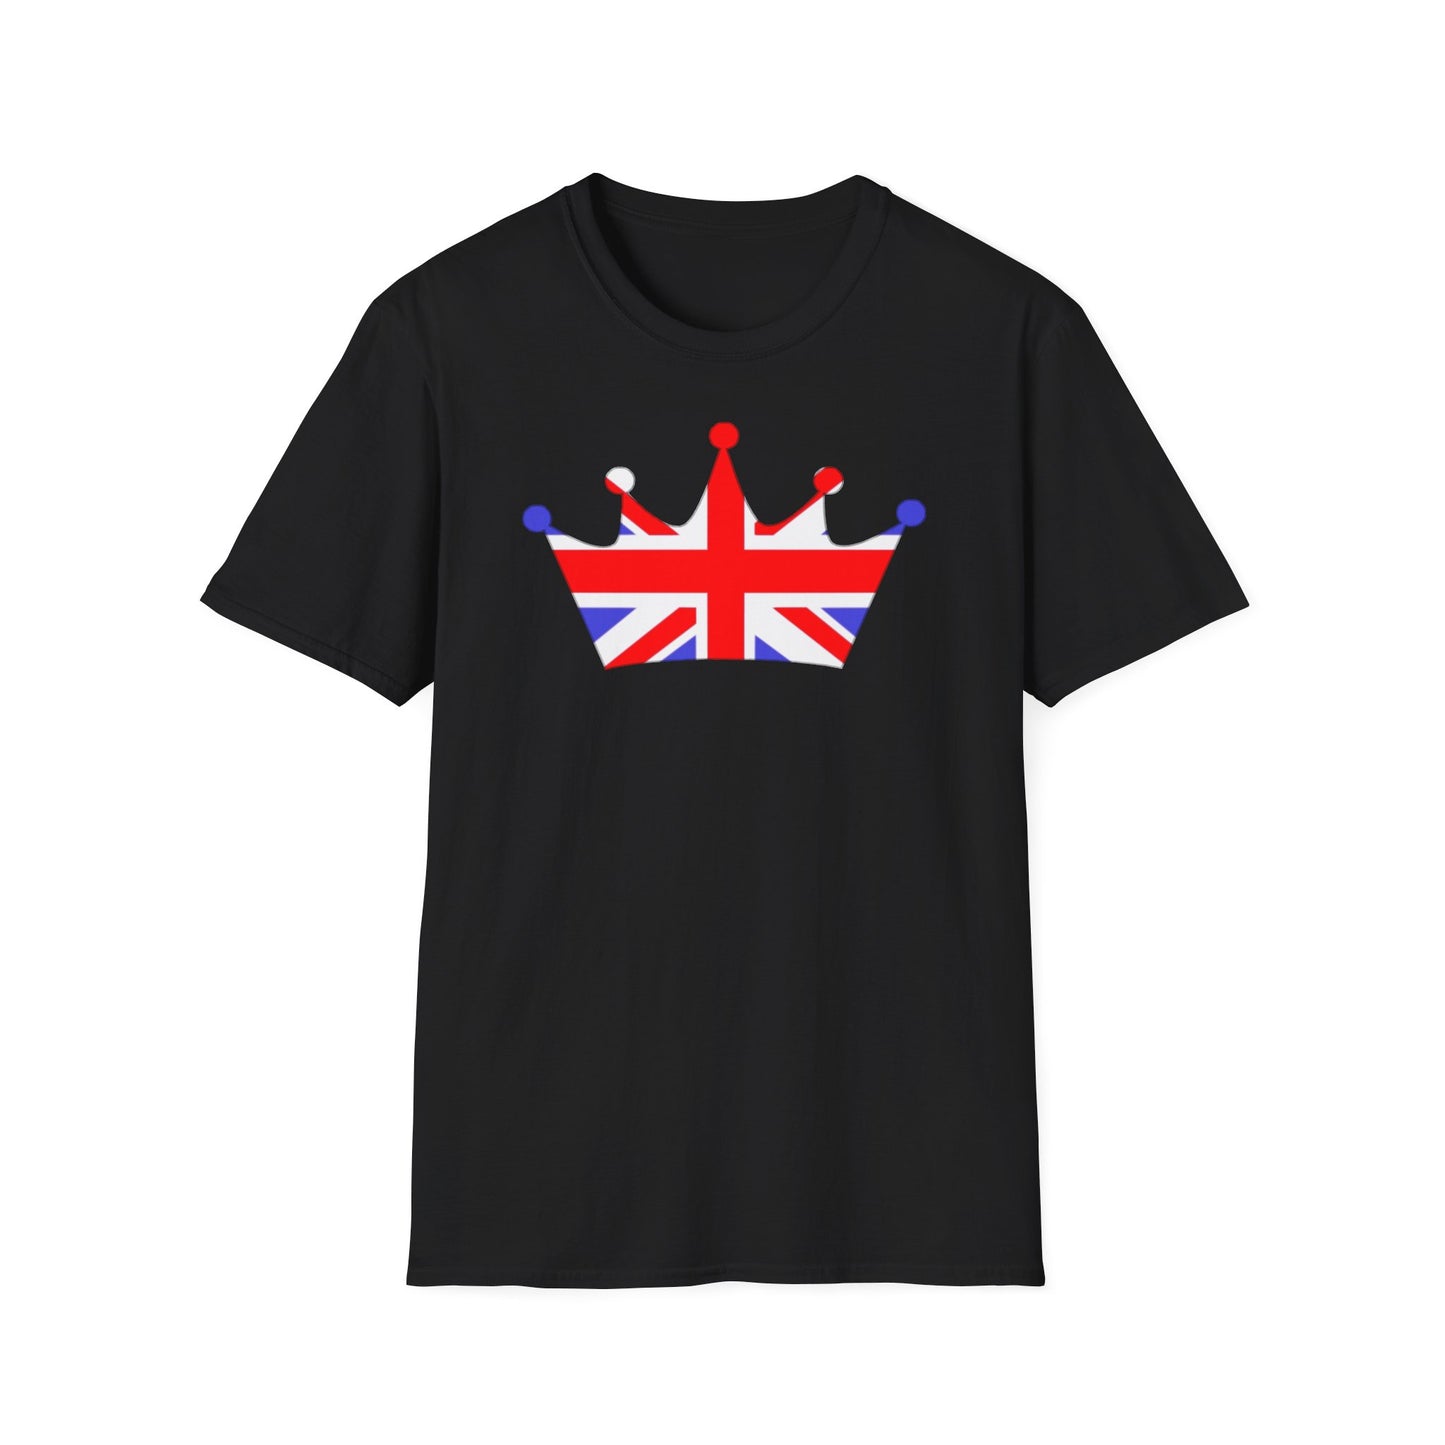 A black t-shirt with a design of a Union Jack flag in the shape of a crown